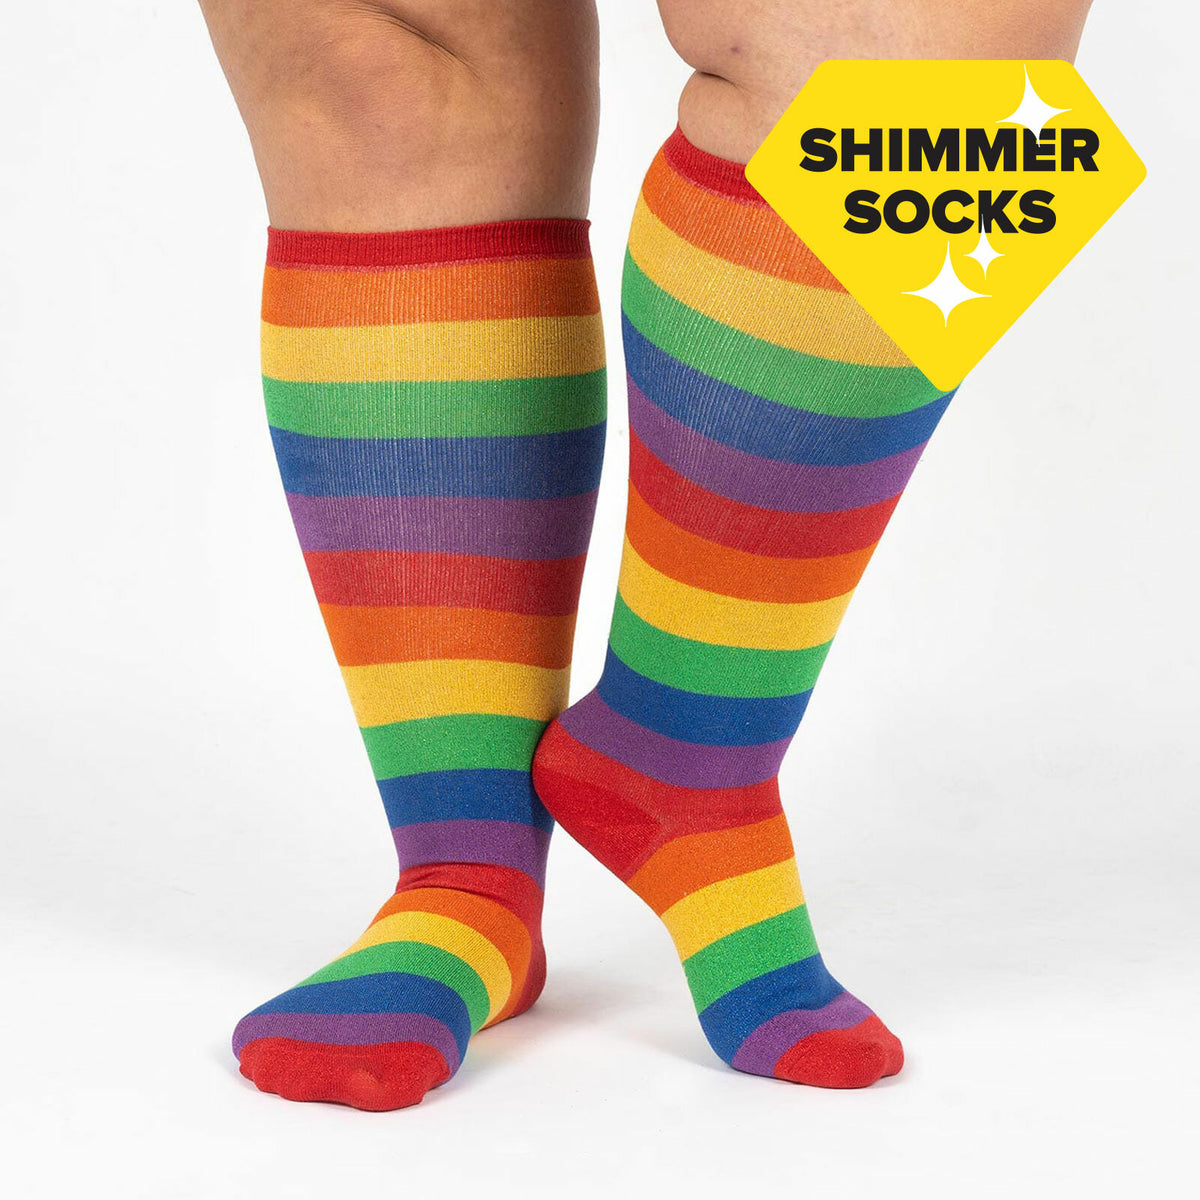 Sock It To Me March With Pride crew or extra-stretchy socks